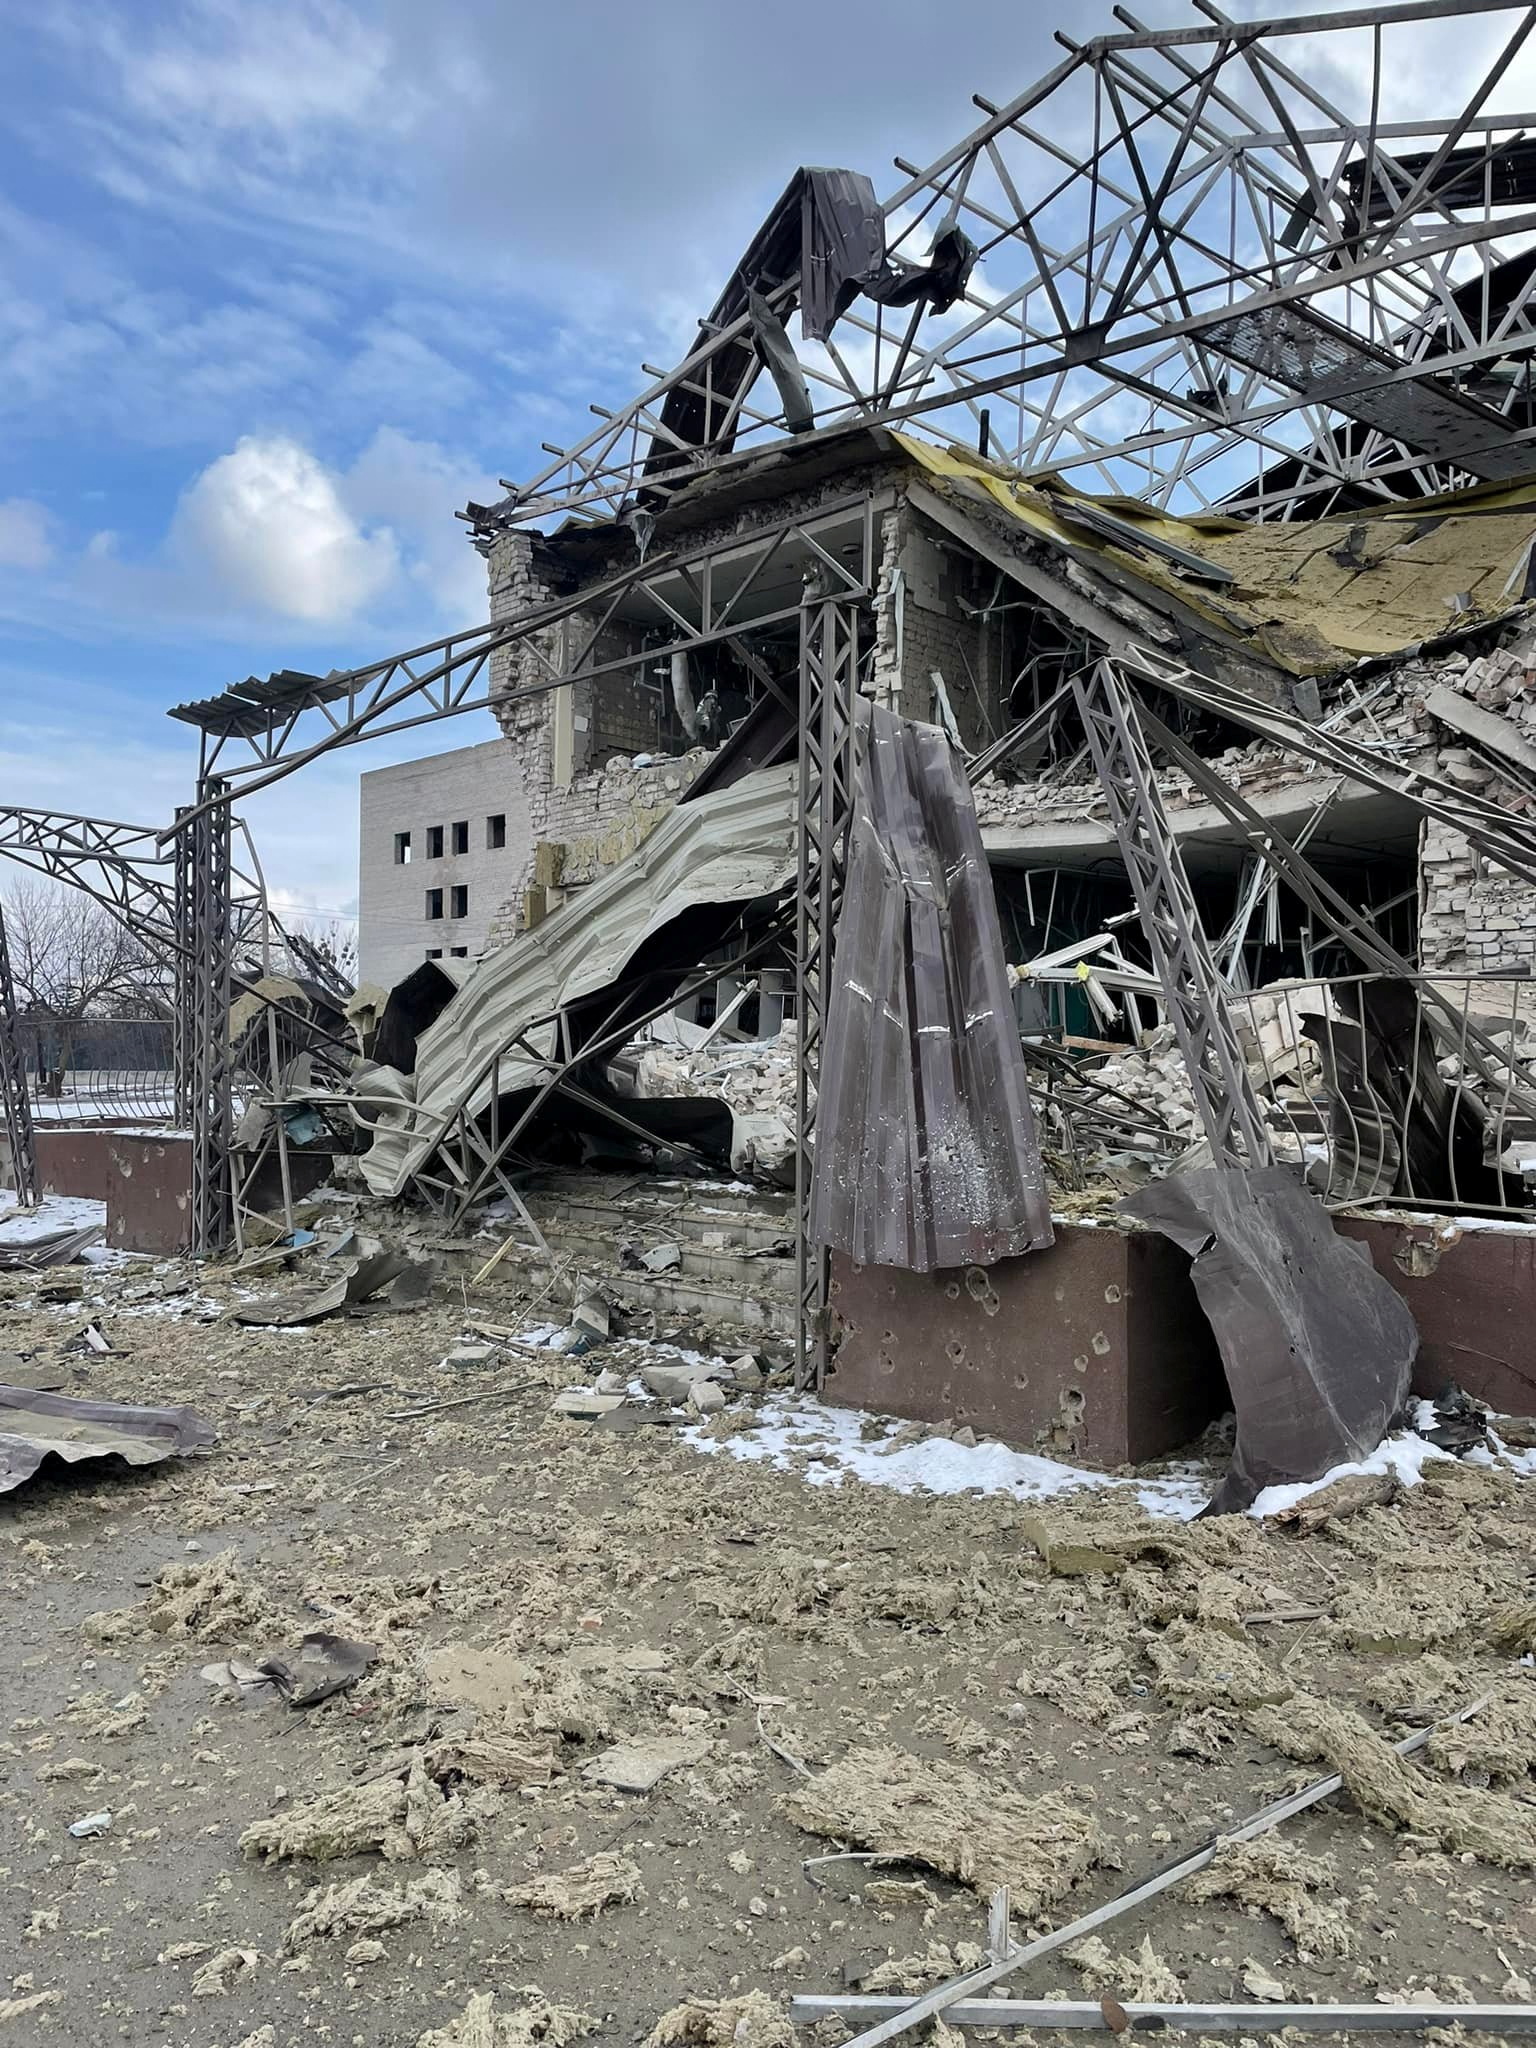 Ukraine: Beleaguered town of Izium at breaking point after constant attack from Russian forces – new testimony